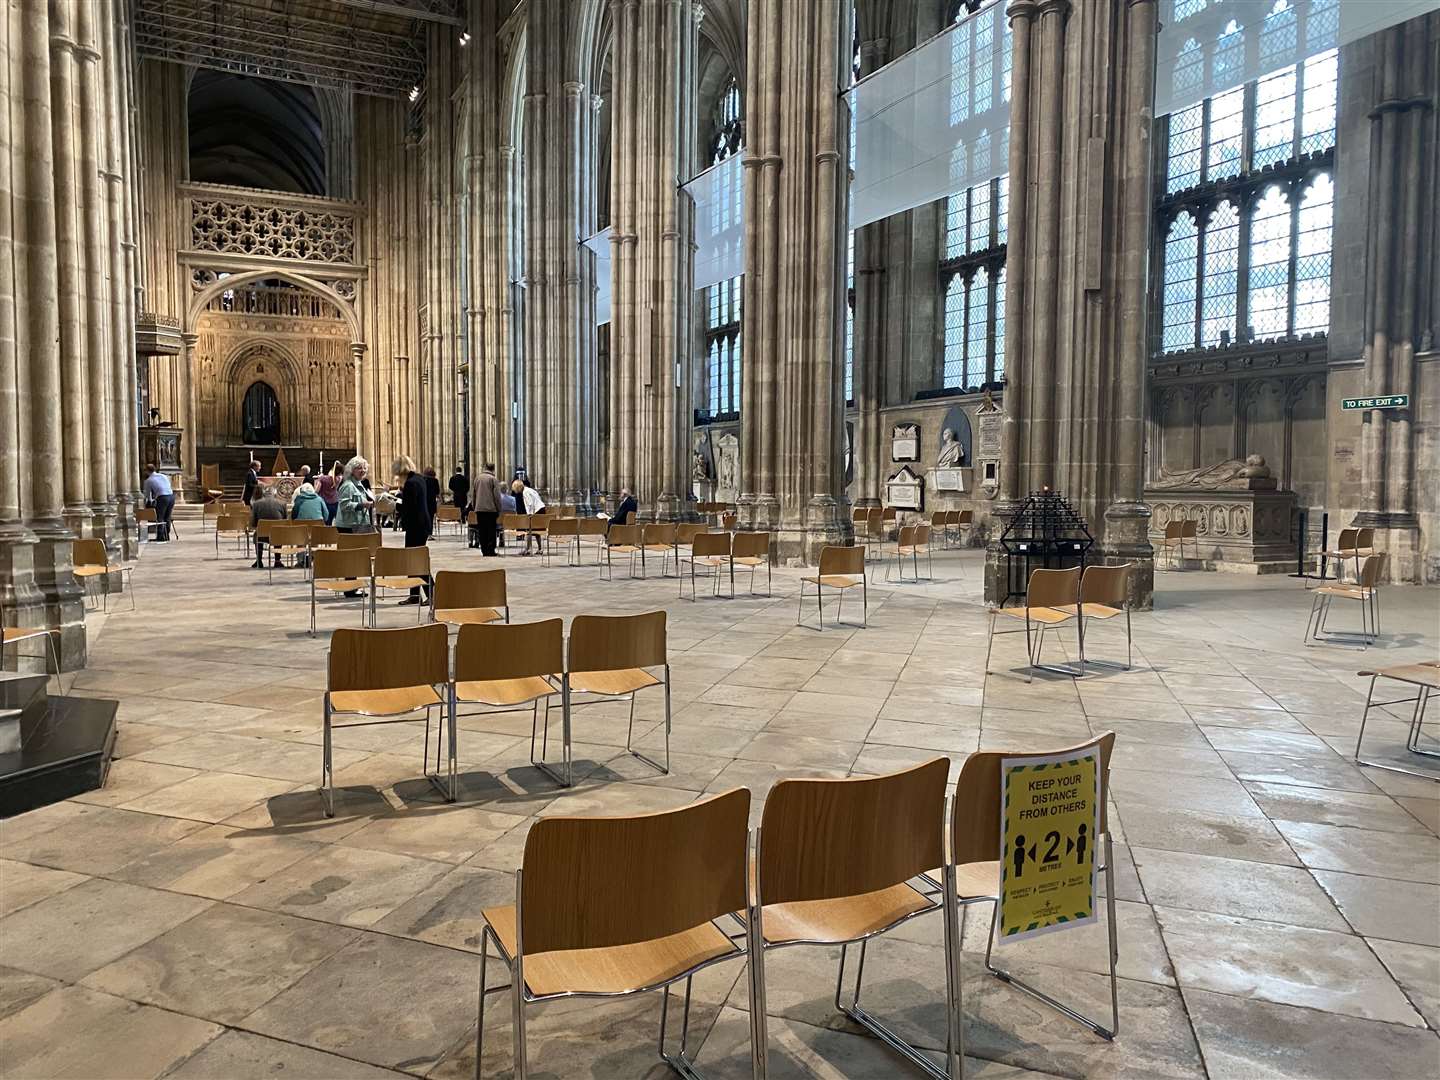 A socially-distanced service being held at the Cathedral back in July